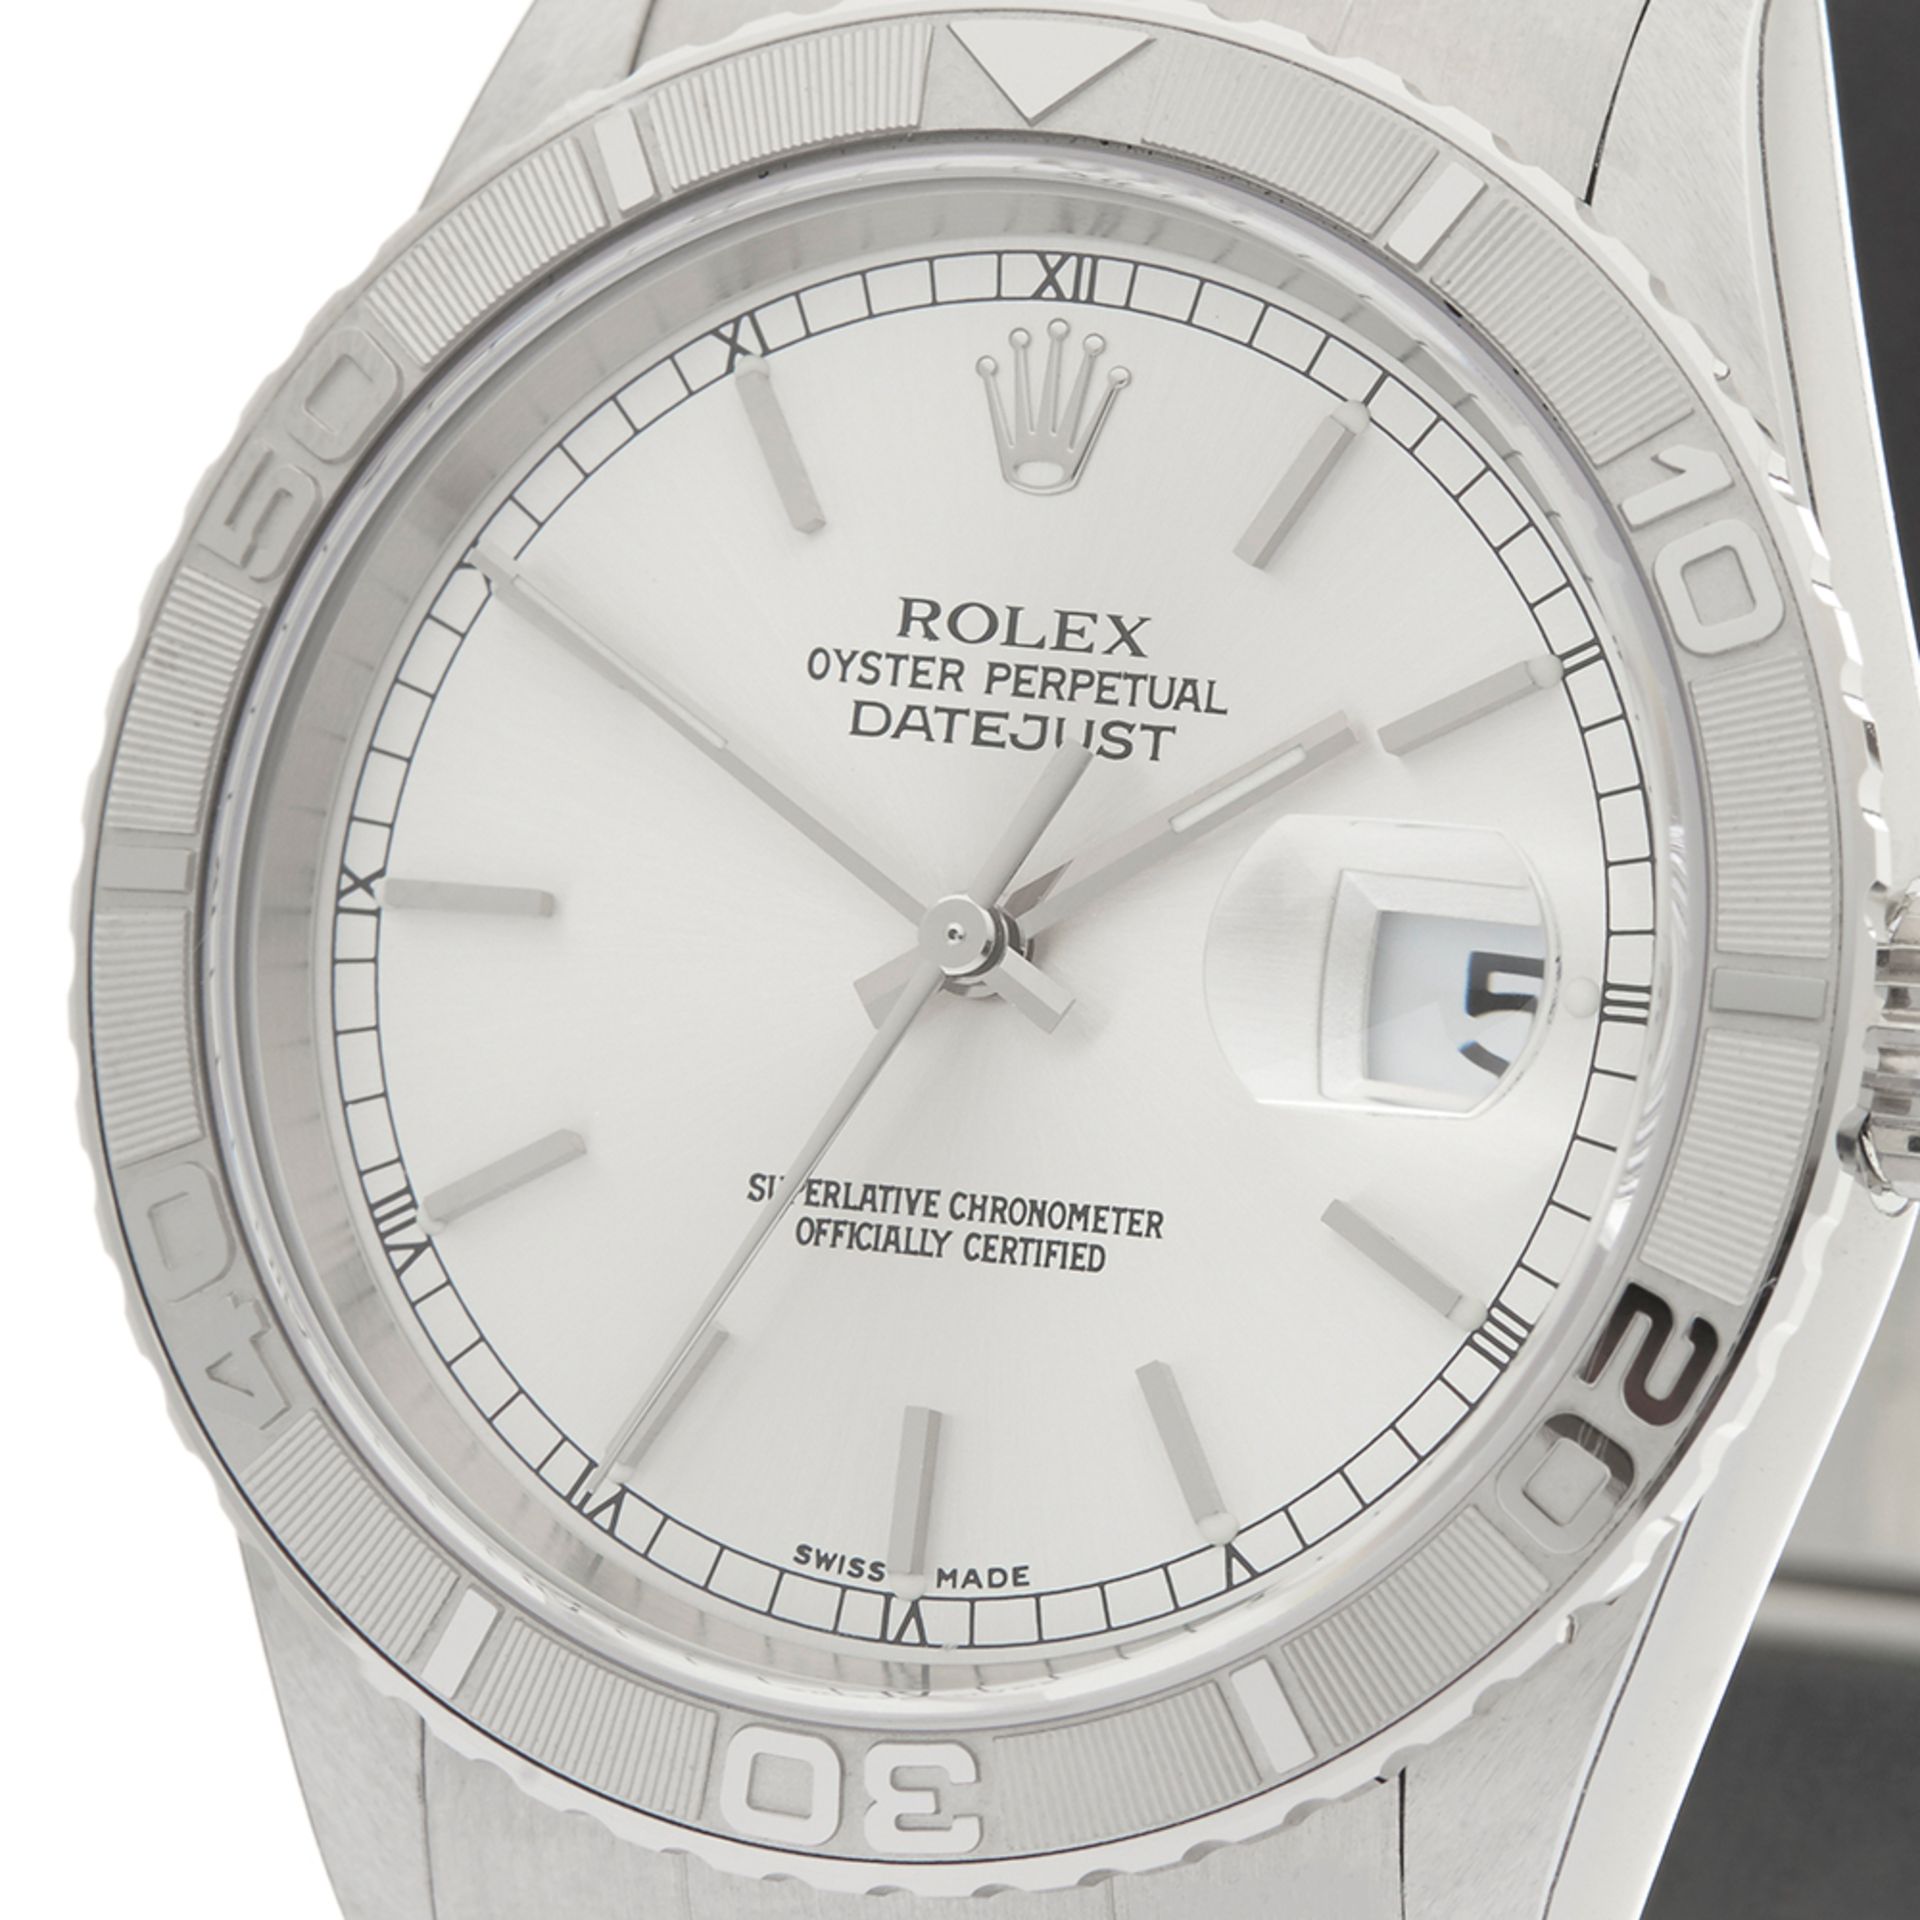 Datejust 36mm Stainless Steel - 16264 - Image 3 of 9